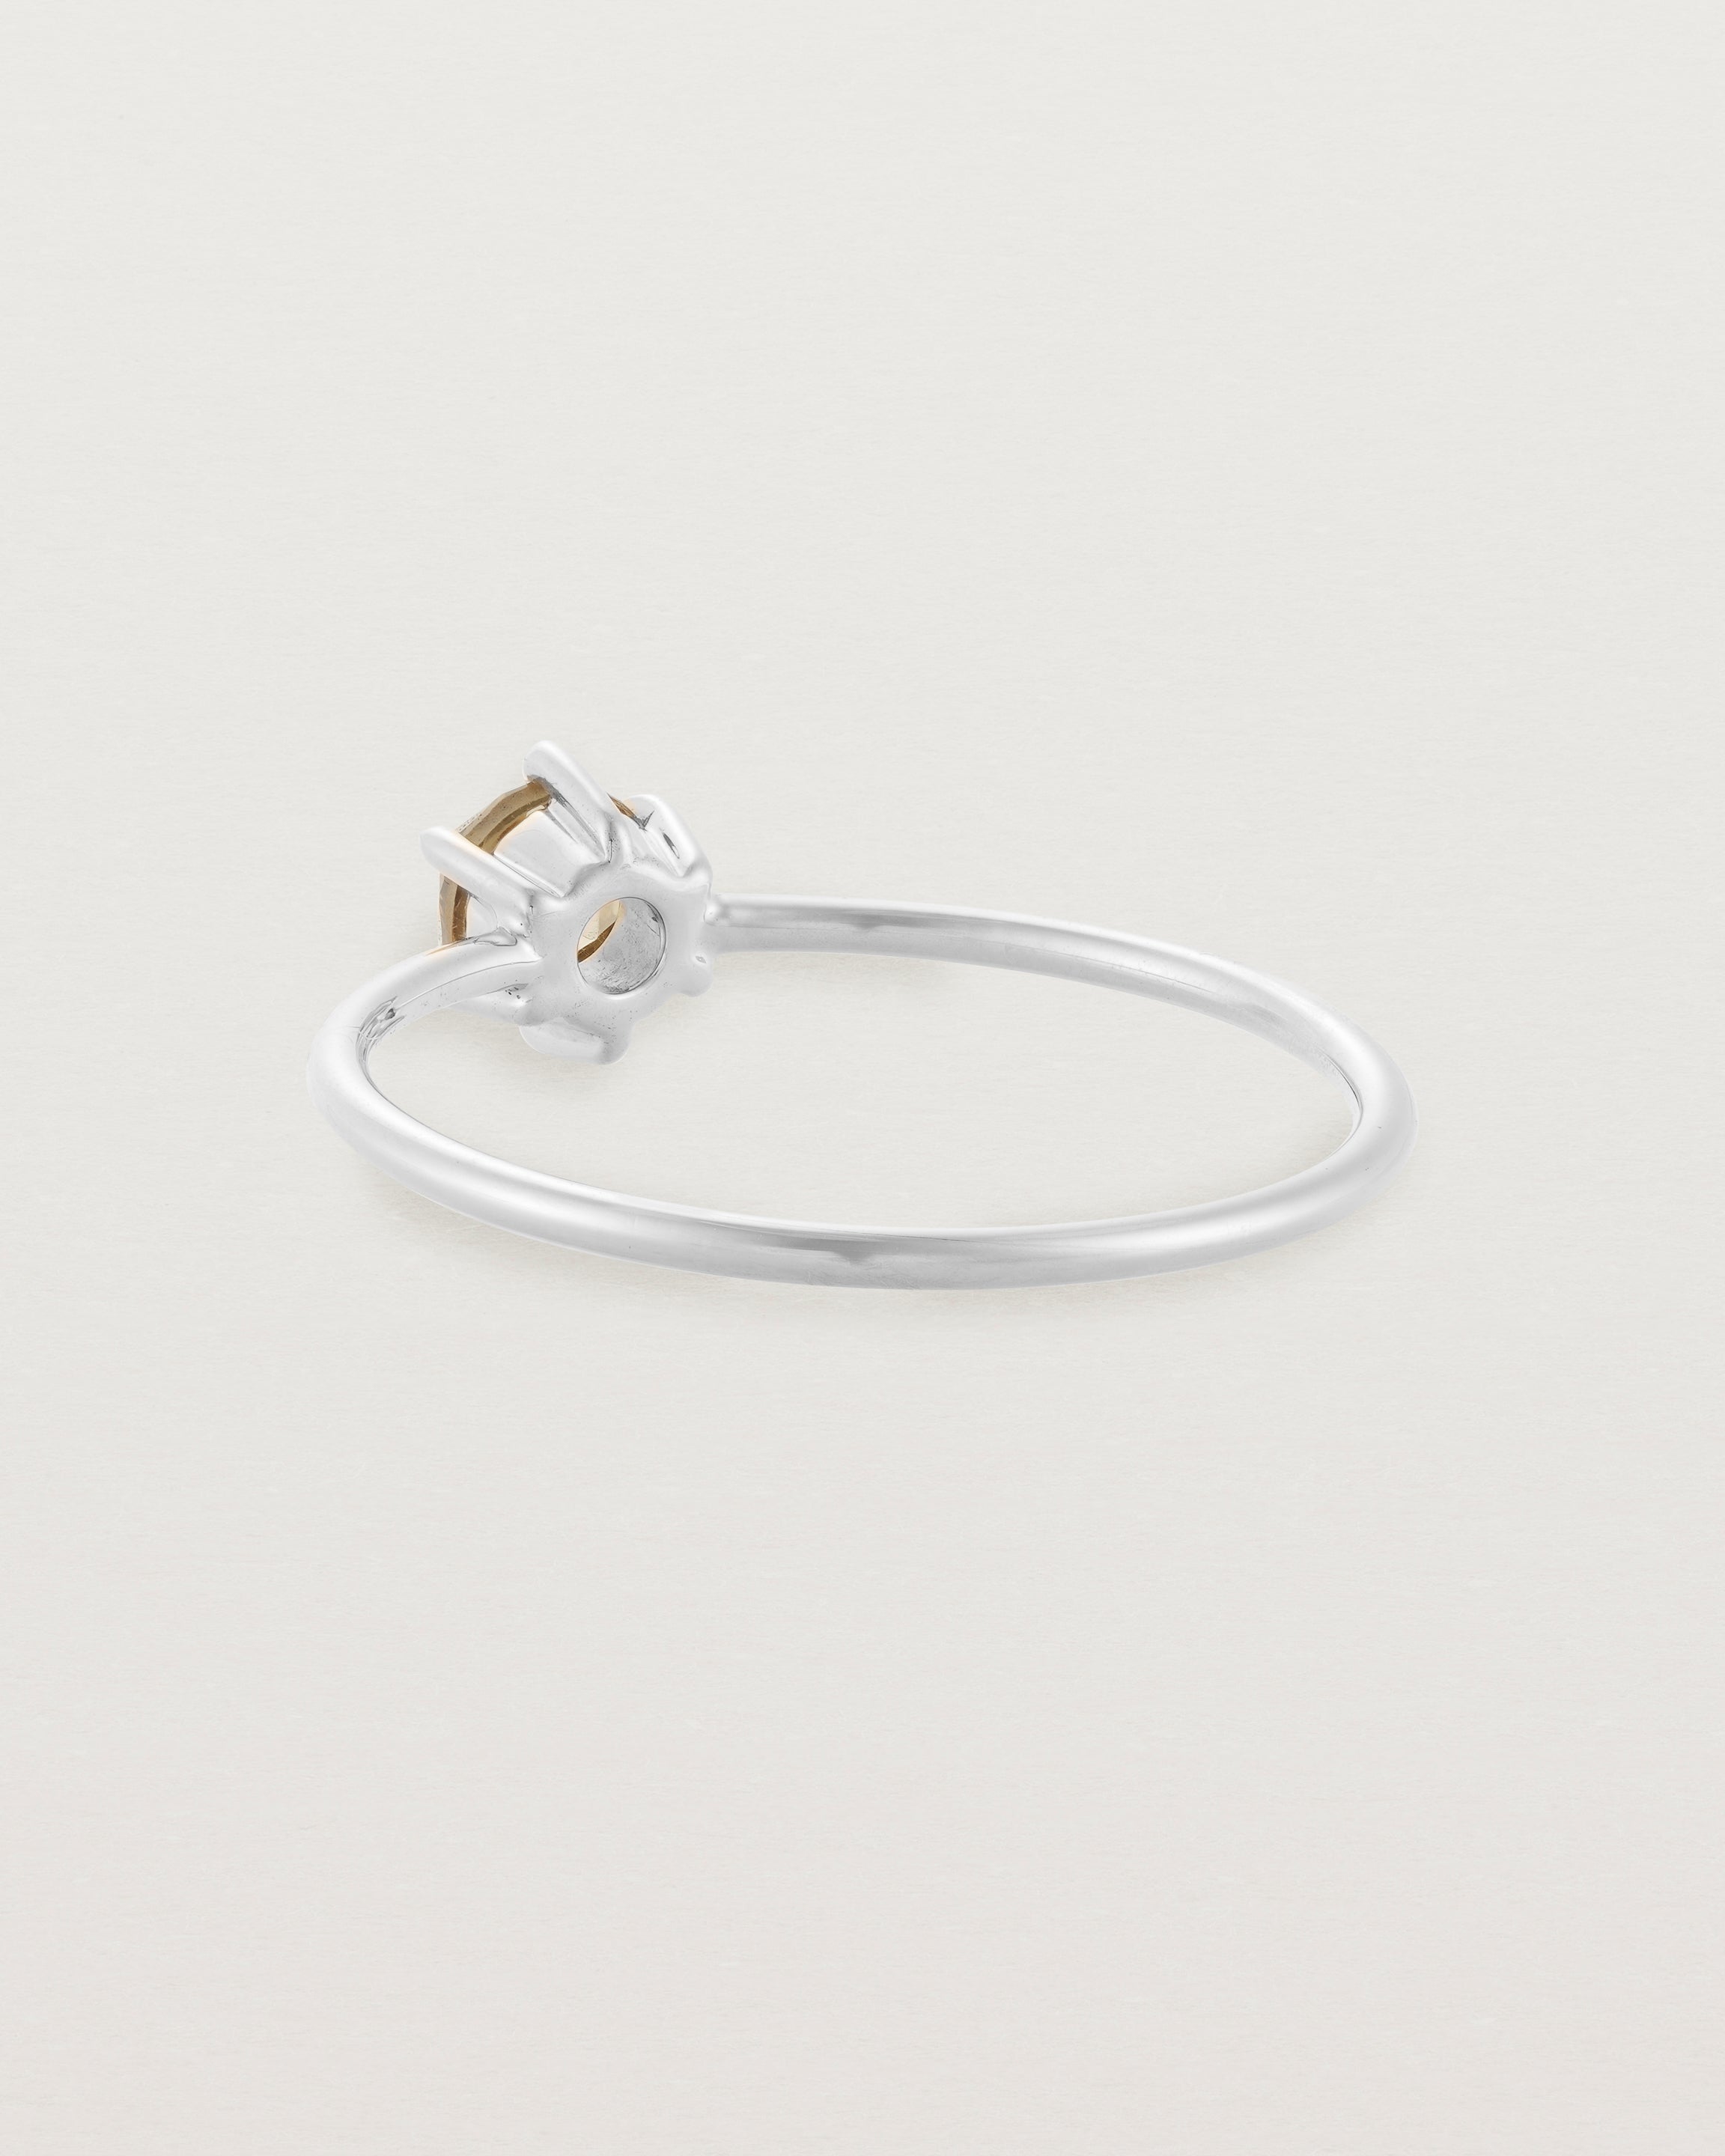 Back view of the Tiny Rose Cut Ring | Honey Quartz | Sterling Silver.